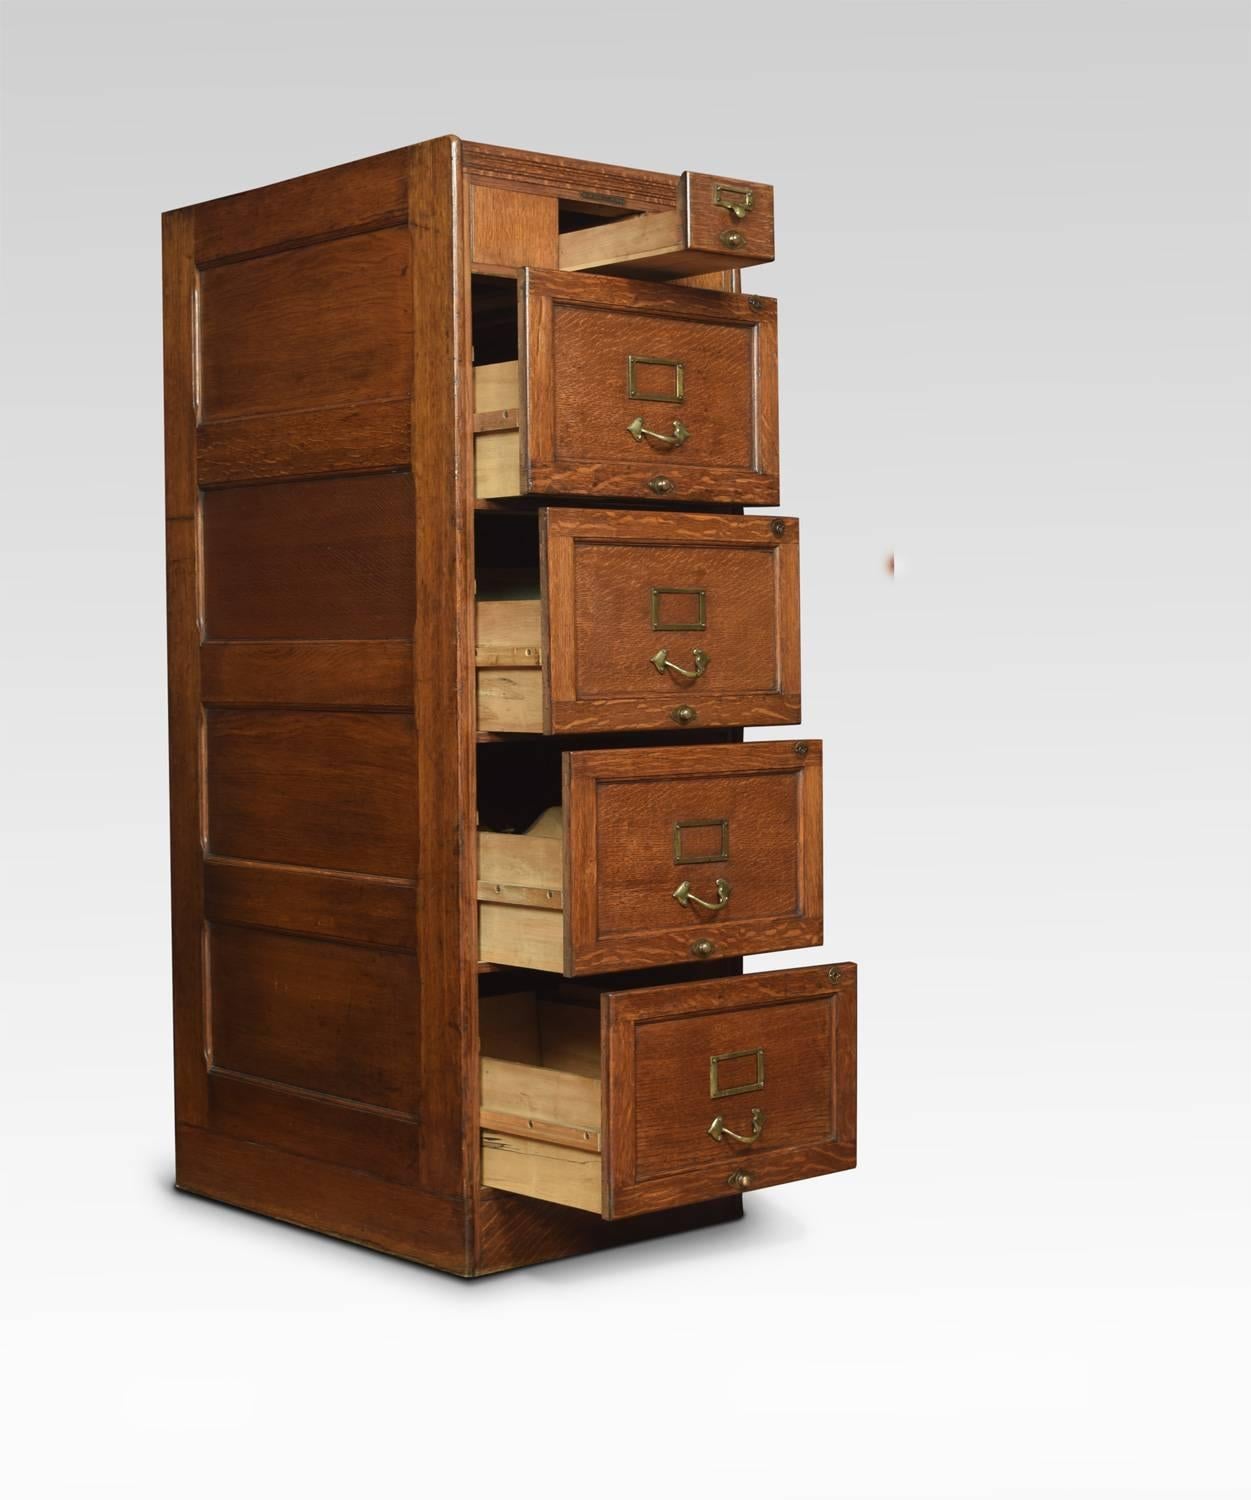 Edwardian solid oak filing cabinet, having square top with plaque inscribed William Barlow office furnishers west Hartlepool, to the single short draw above four larger drawers, all draws run freely and have the period brass handles and name plates.